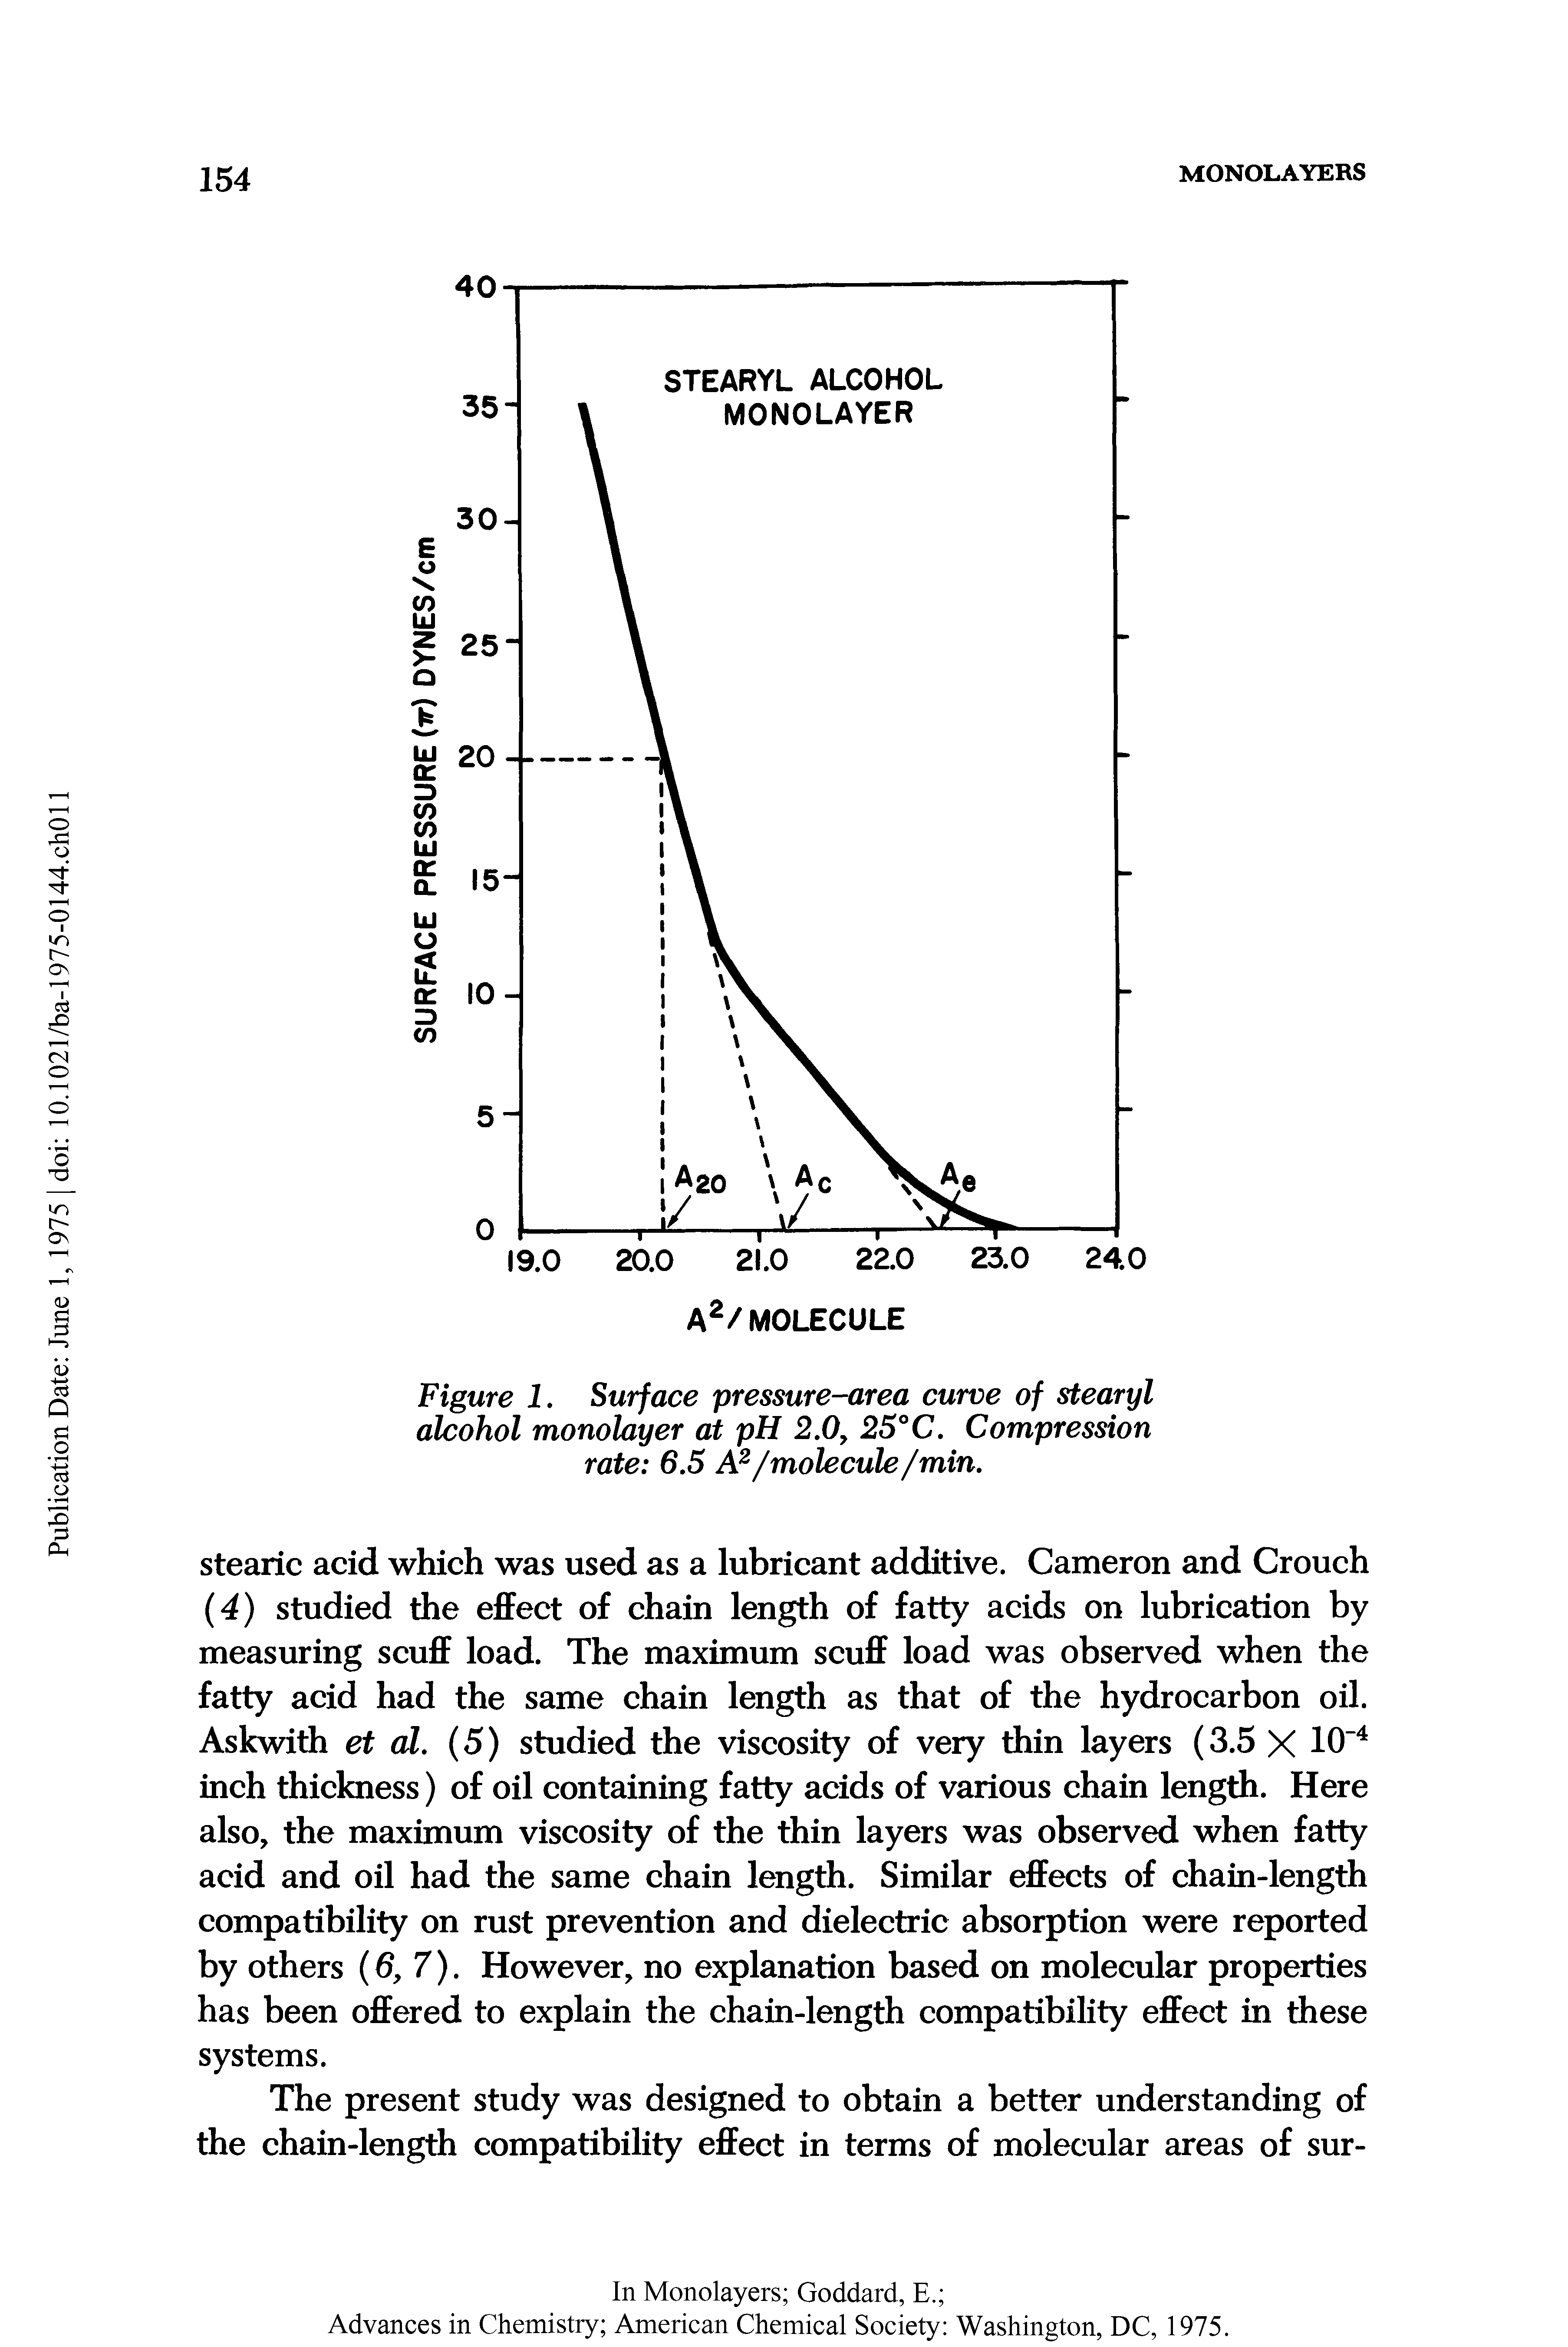 Figure 1. Surface pressure-area curve of stearyl alcohol monolayer at pH 2.0, 25°C. Compression rate 6.5 A2/molecule/min.